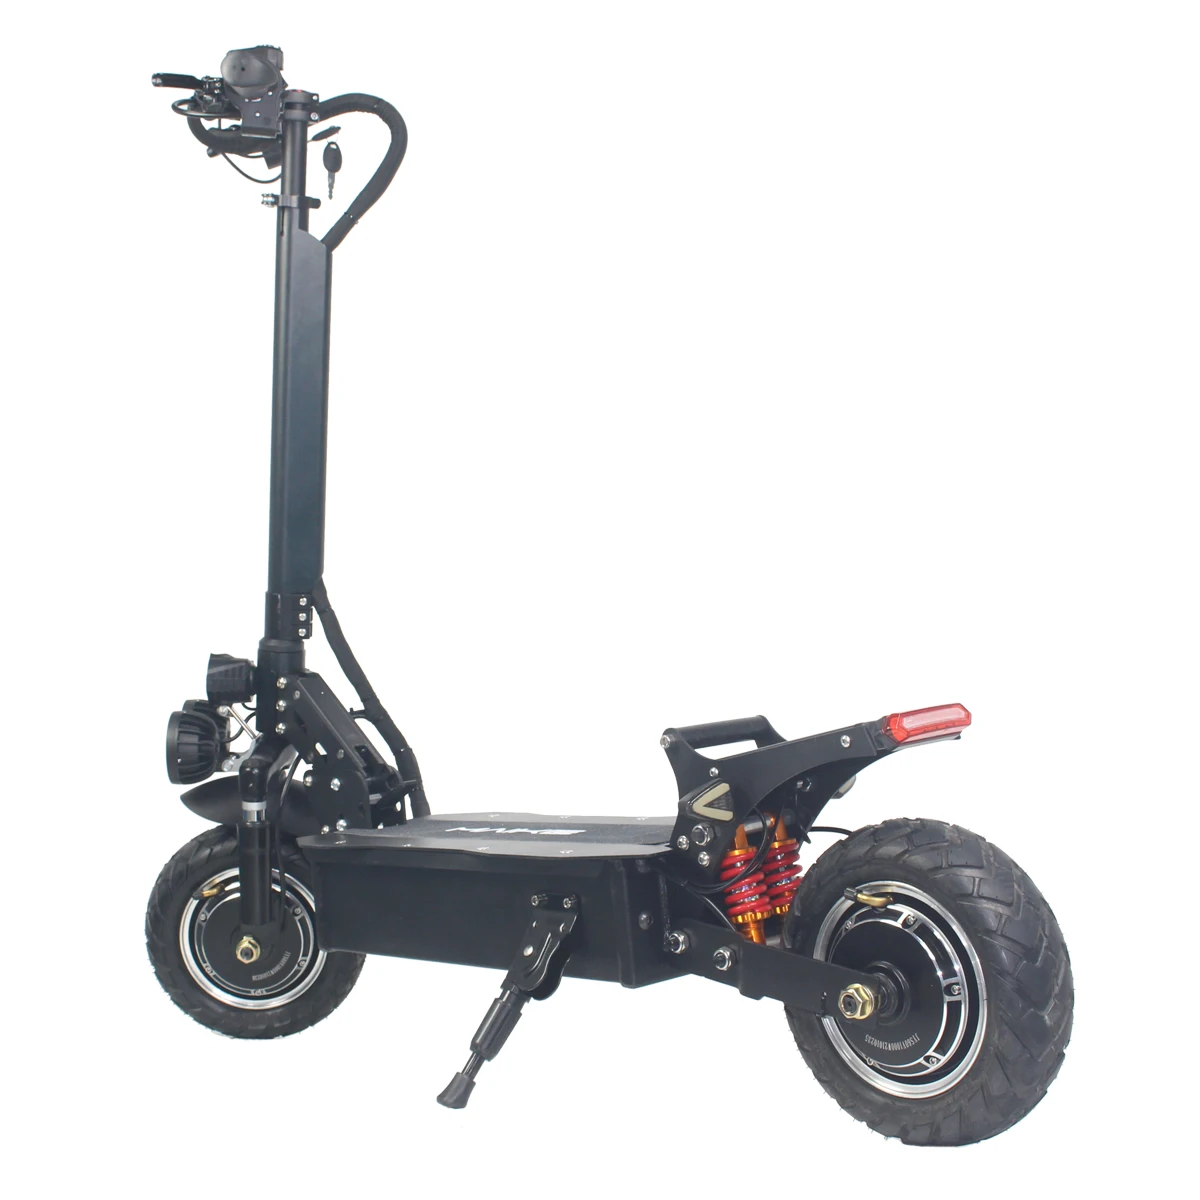 

Black friday cheap price maike mk6 10 inch fat tire 1000w 2000w dual motor e scooter off road electric scooter for adults